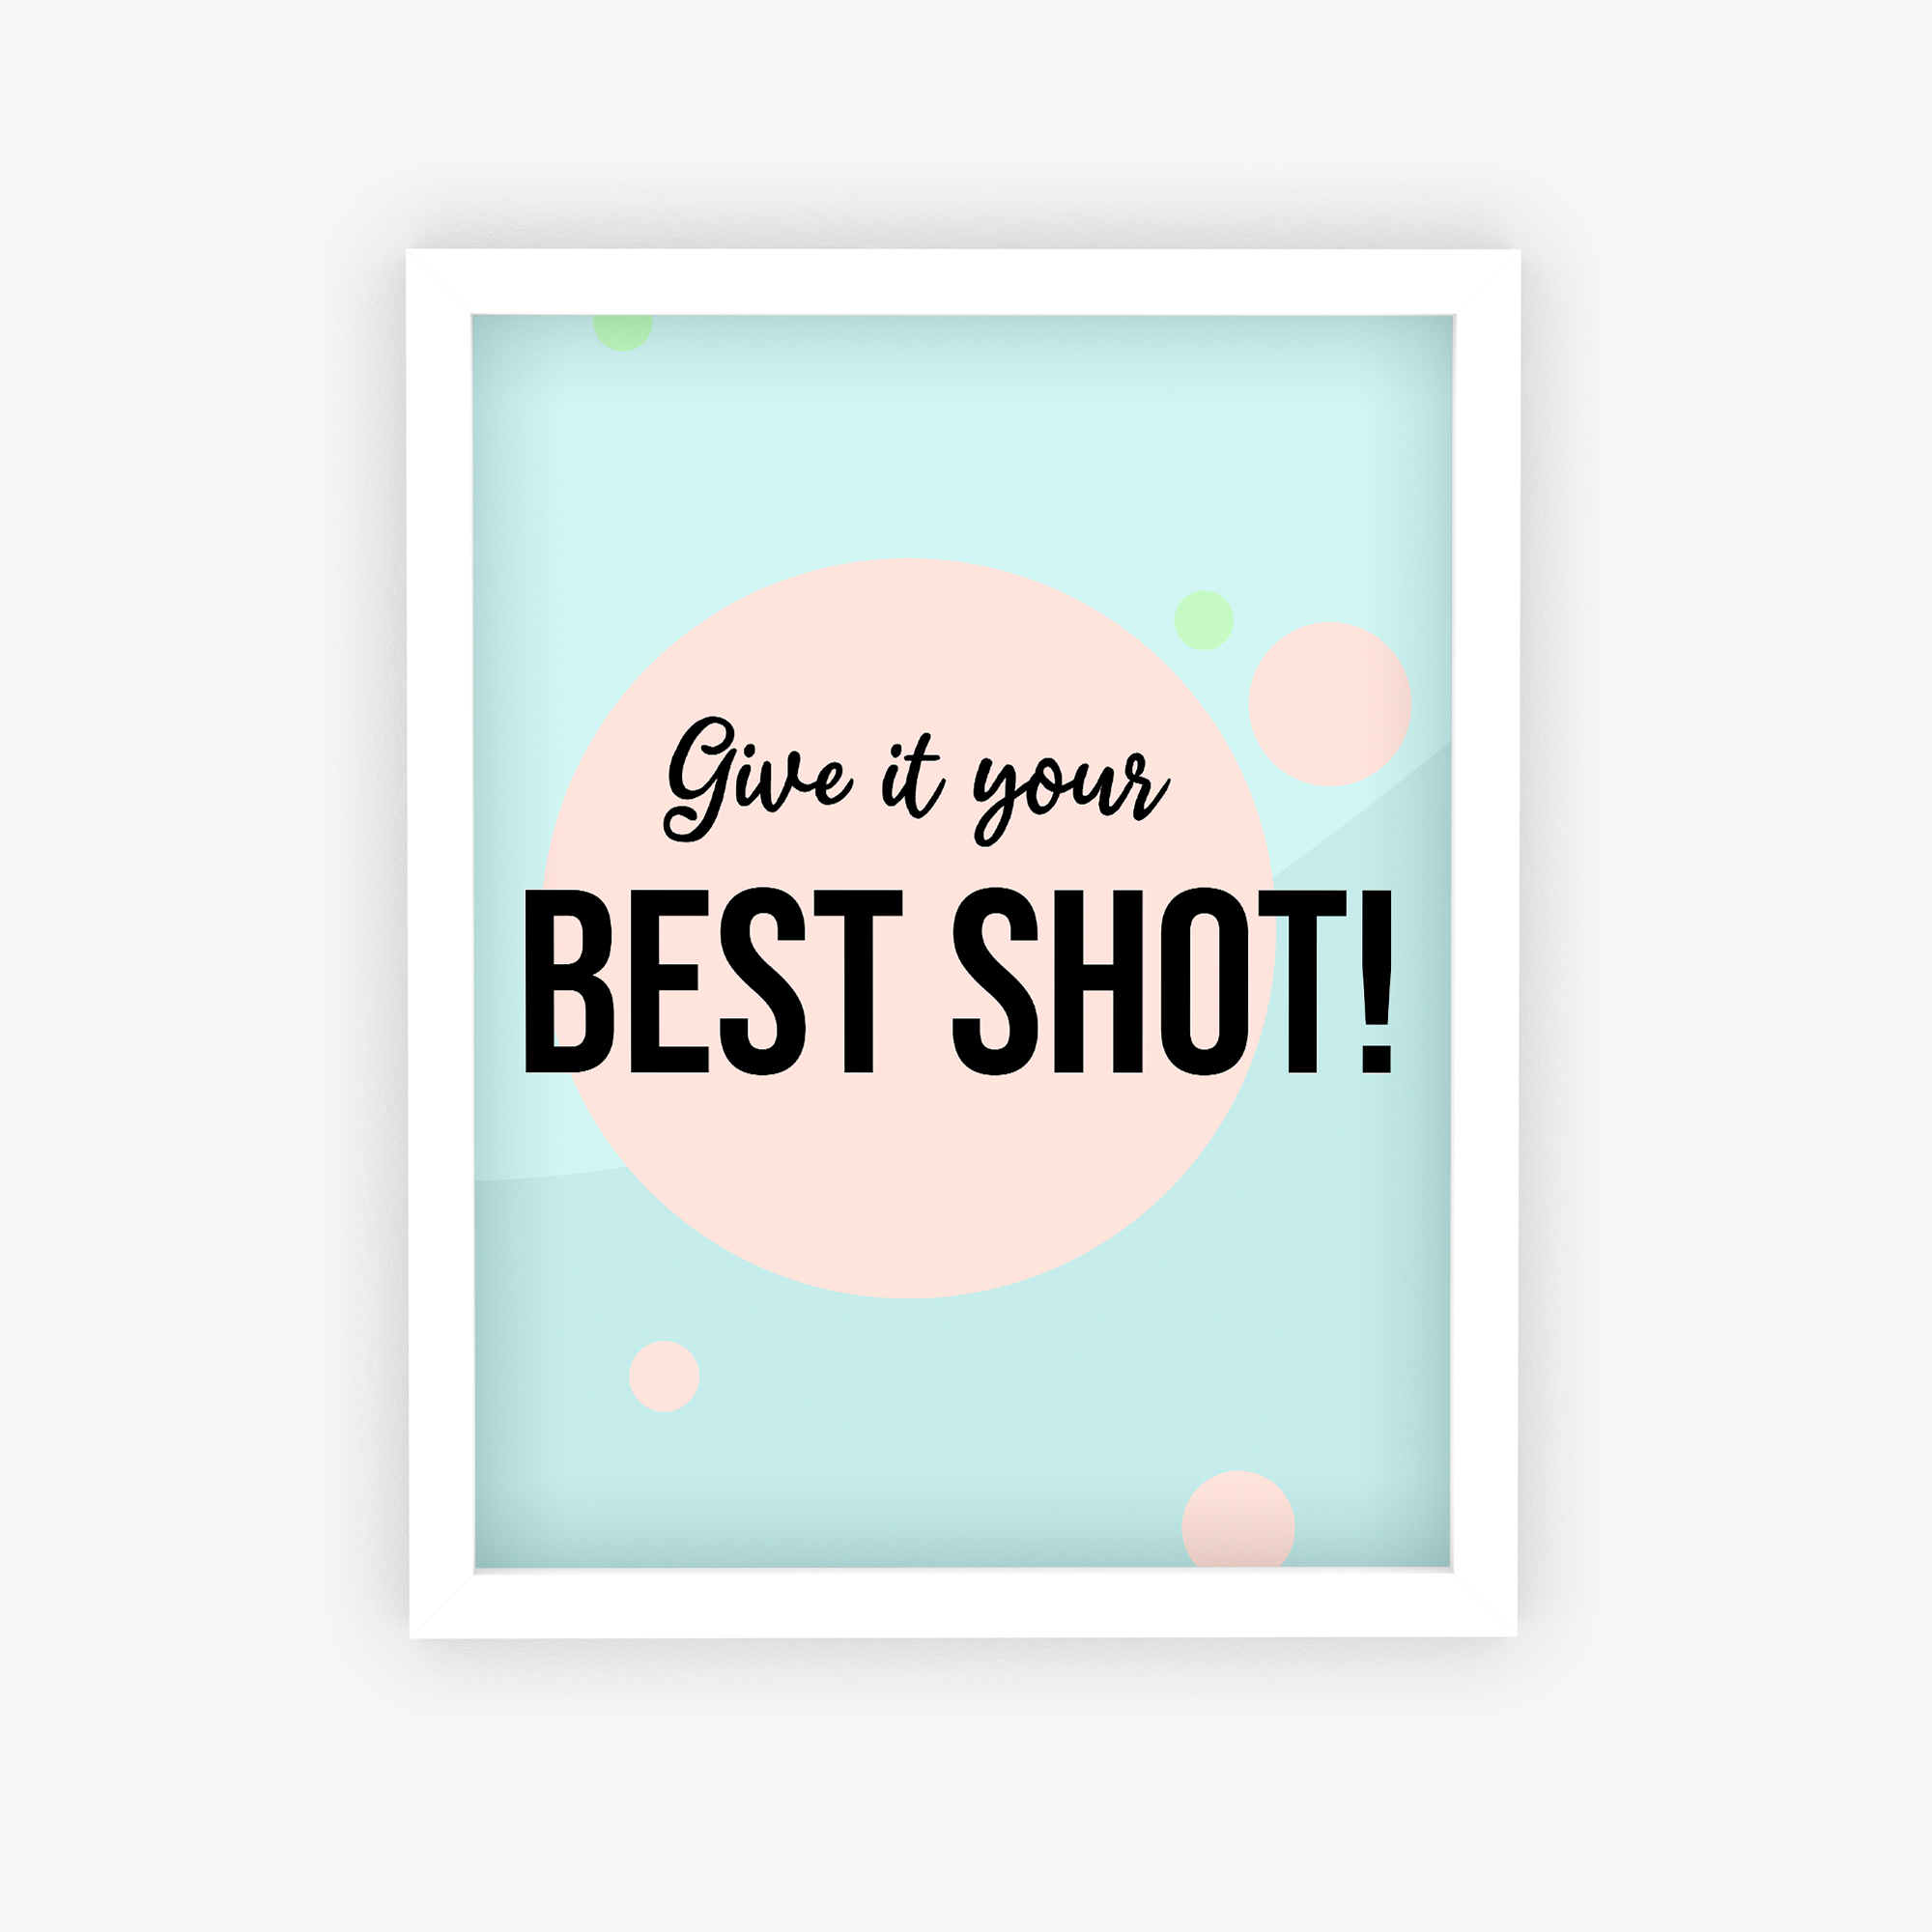 Give It Your Best Shot! Poster